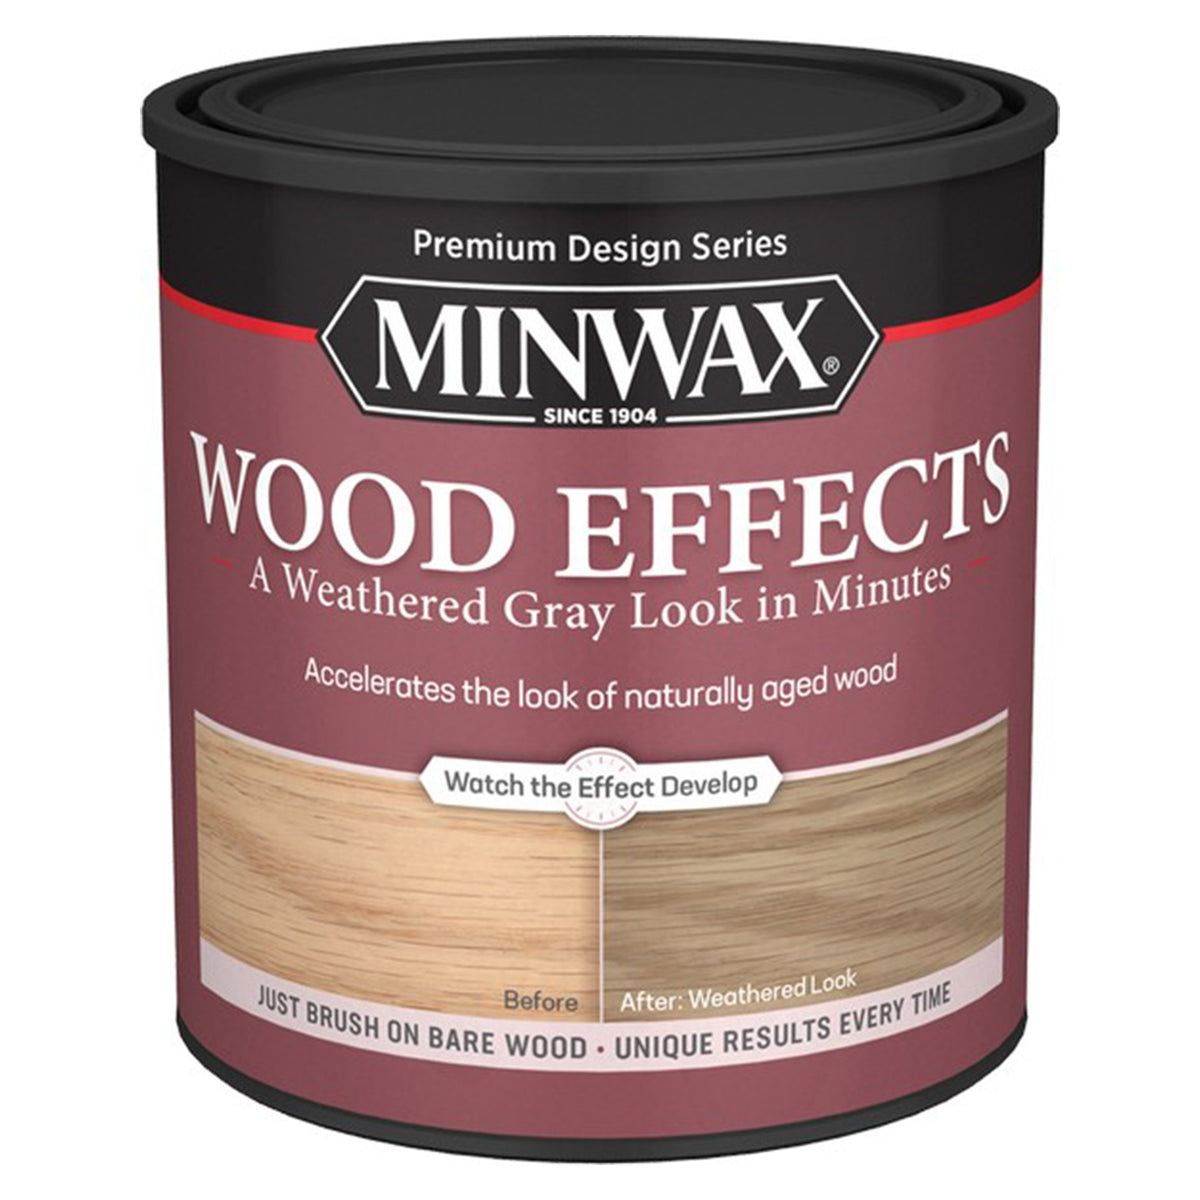 Minwax Wood Finish Gray Stain Marker in the Wood Stain Repair department at